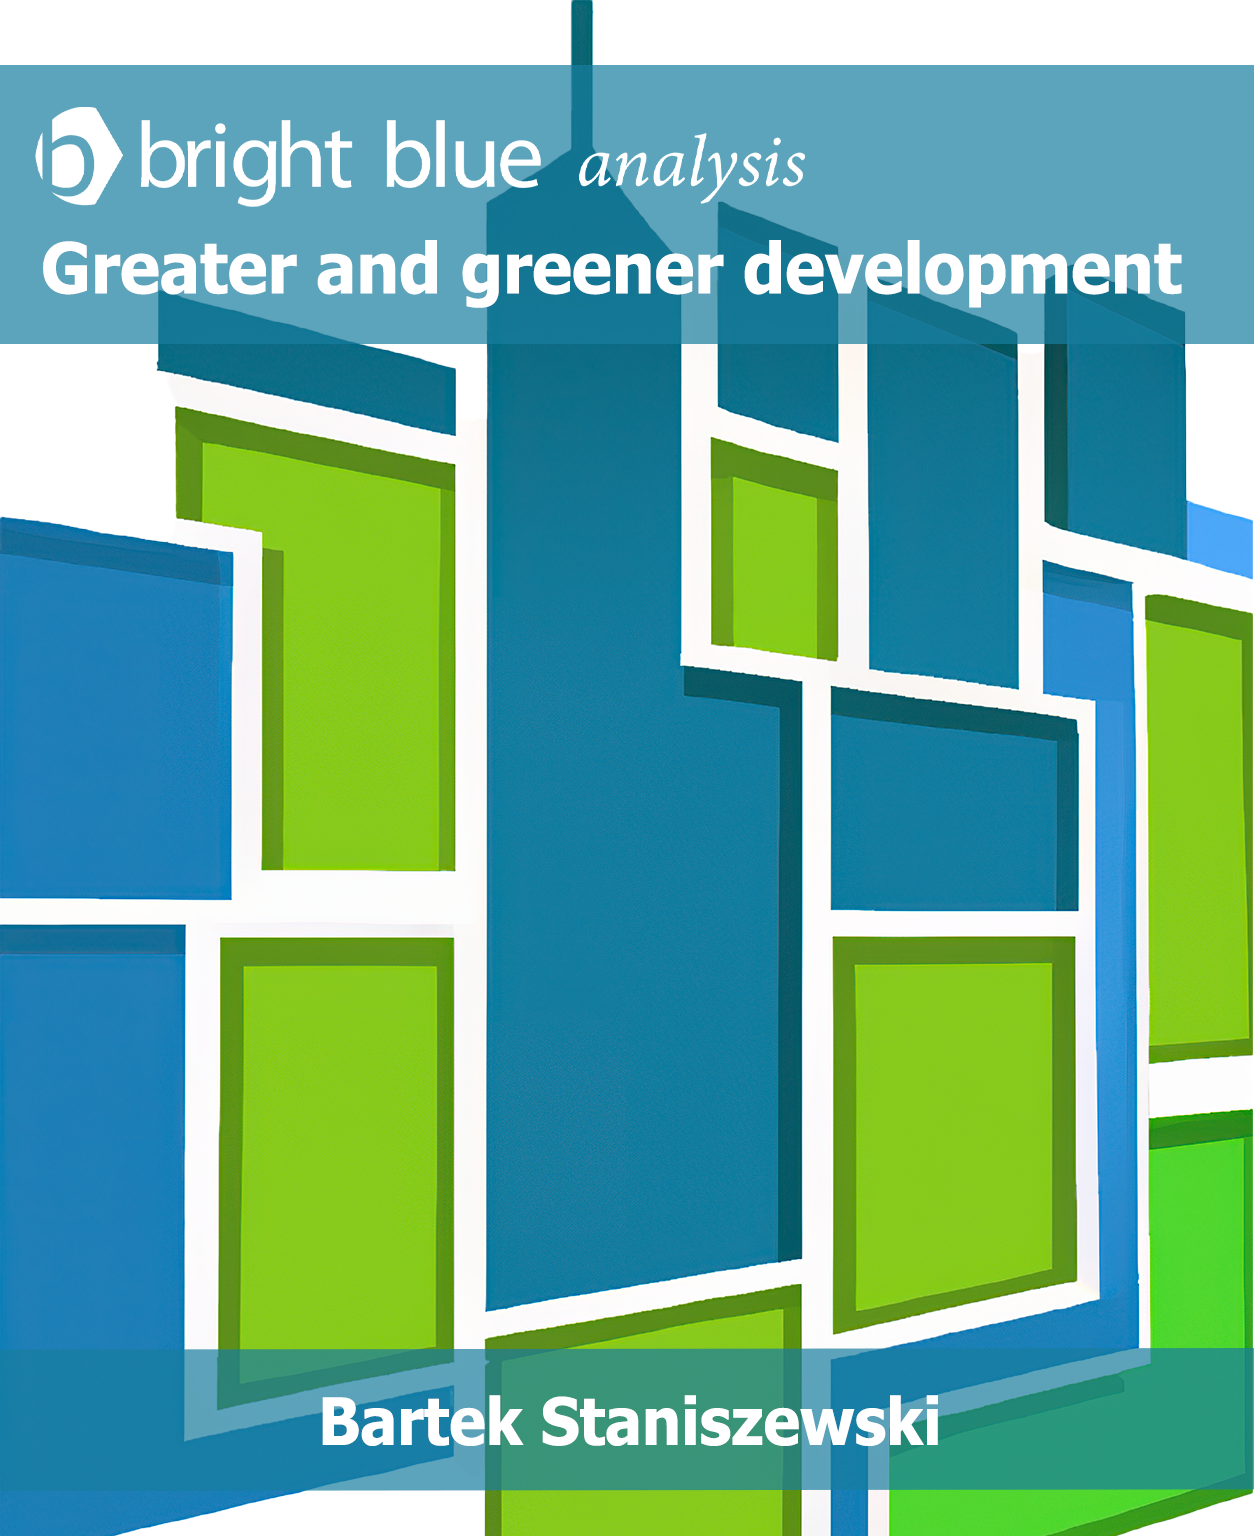 Greater and greener development